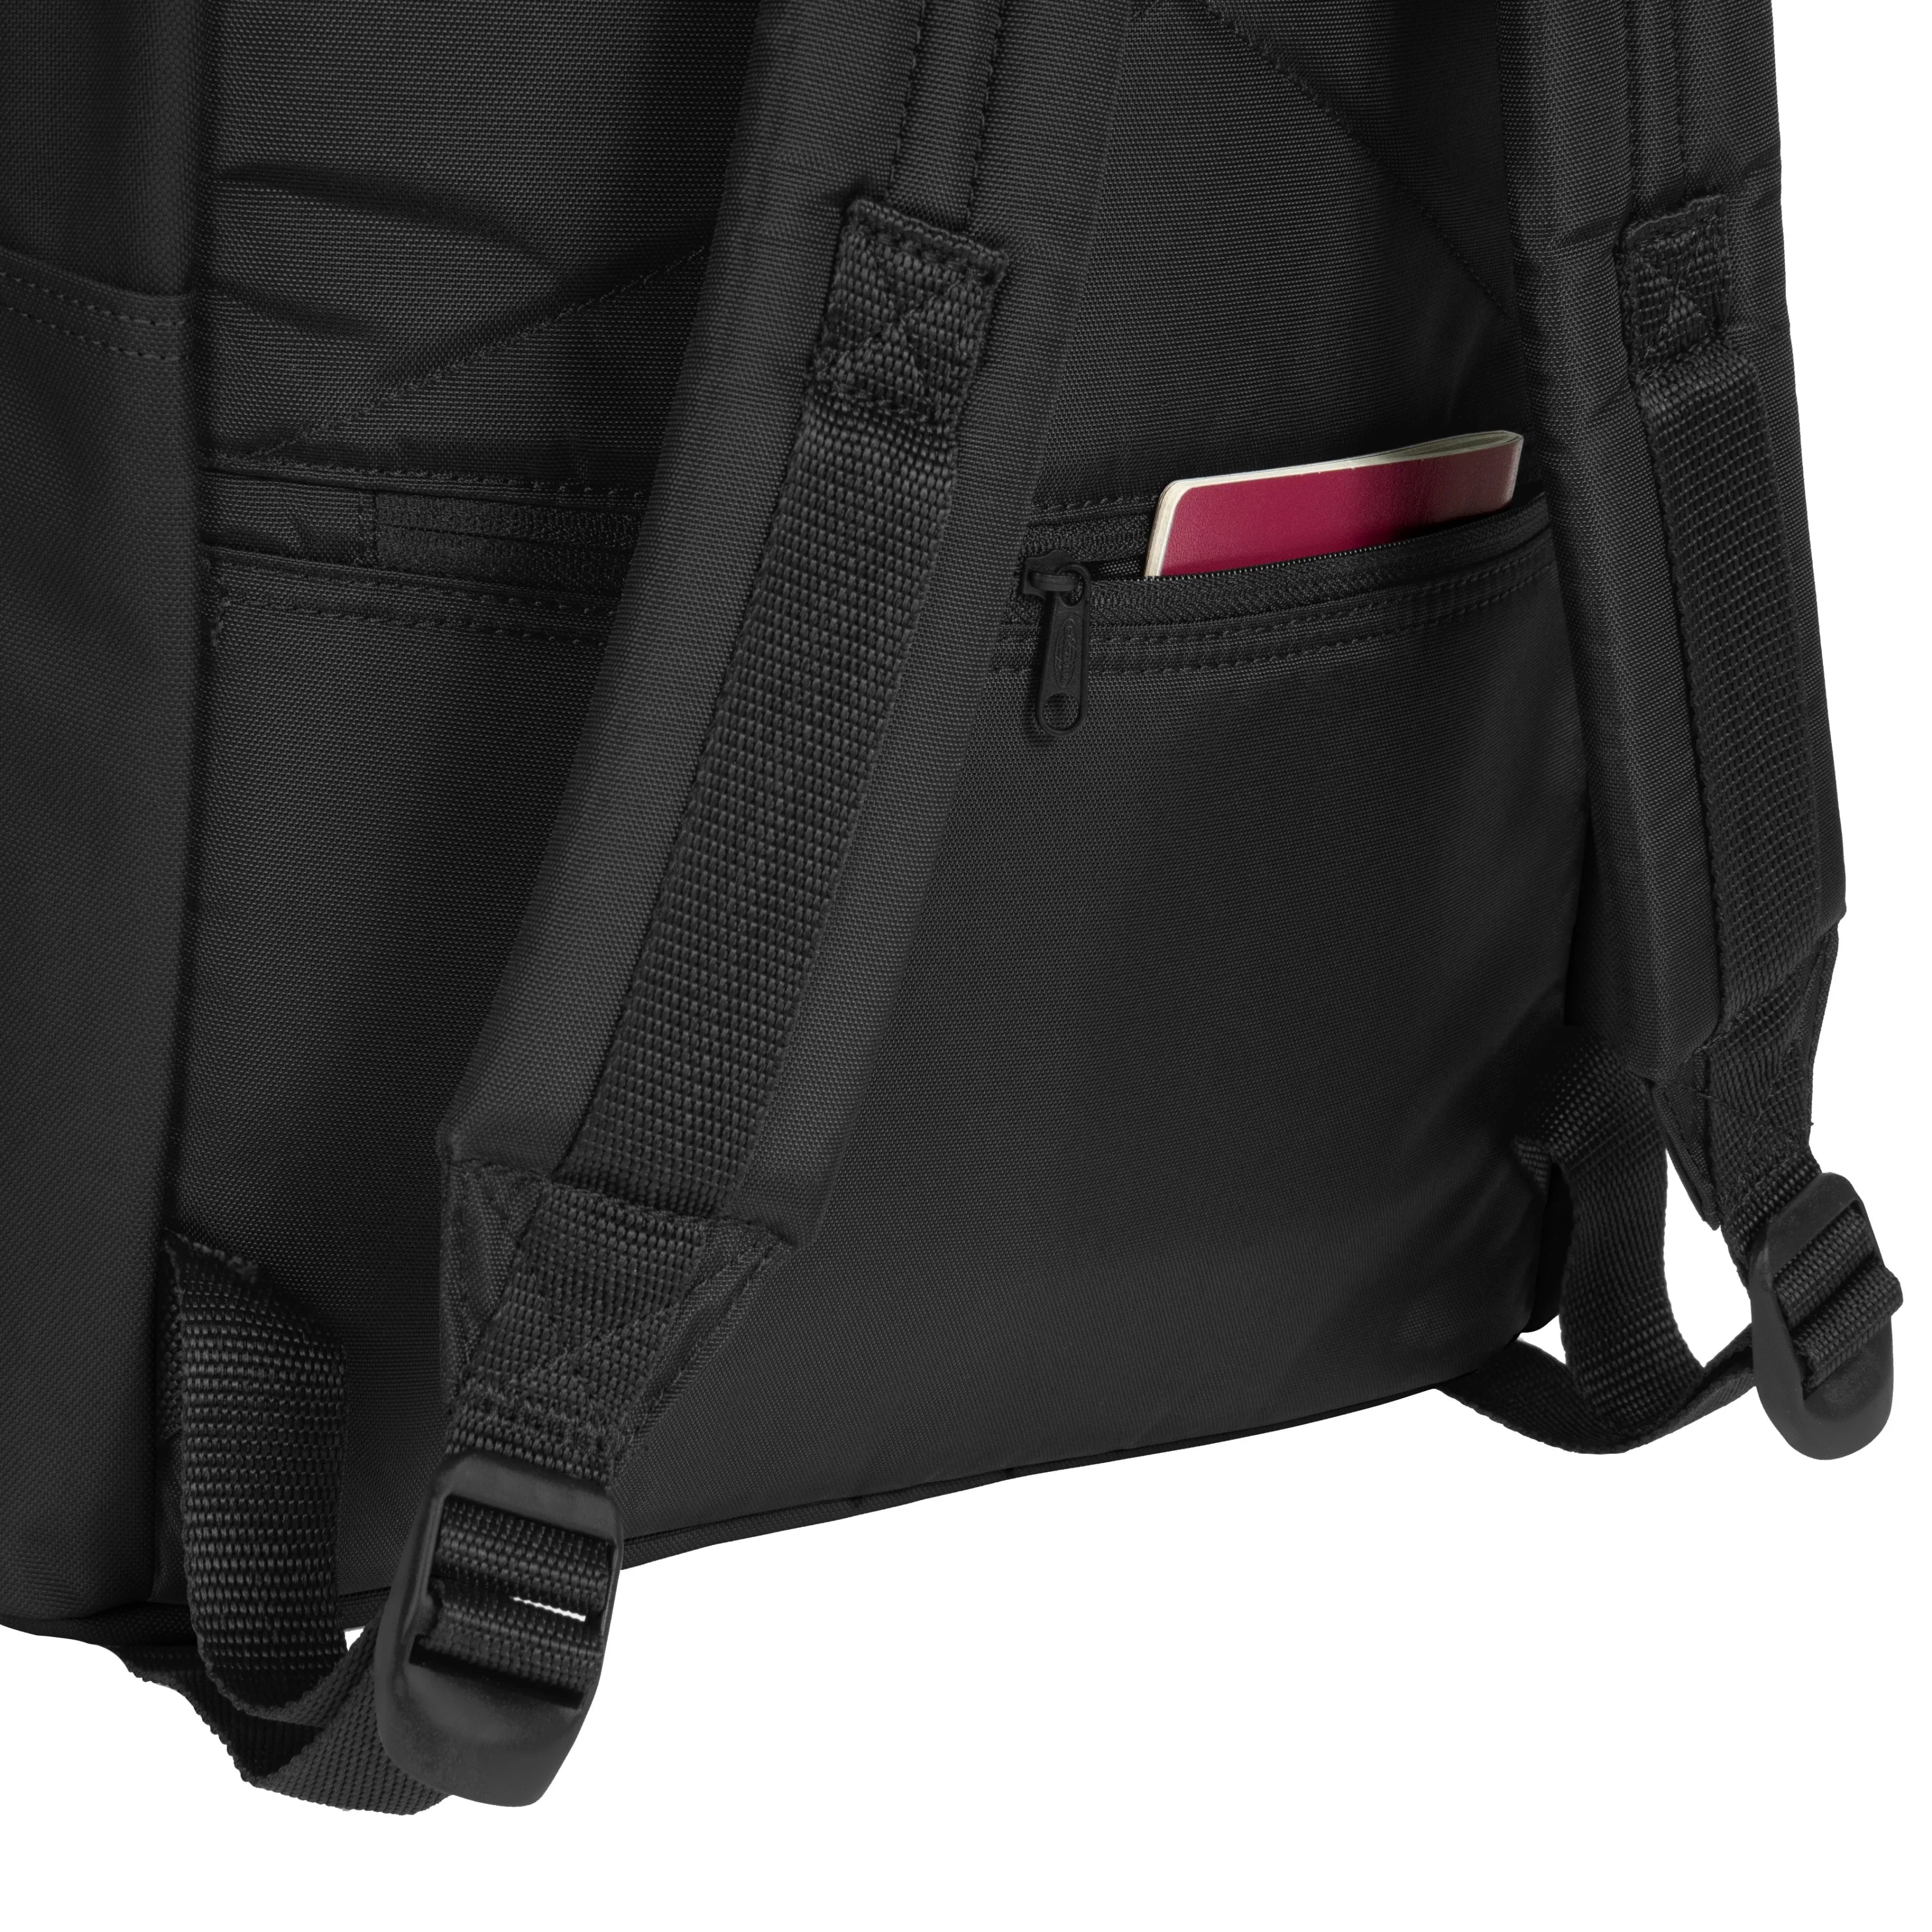 Eastpak Authentic Padded Double Backpack 47 cm - Black